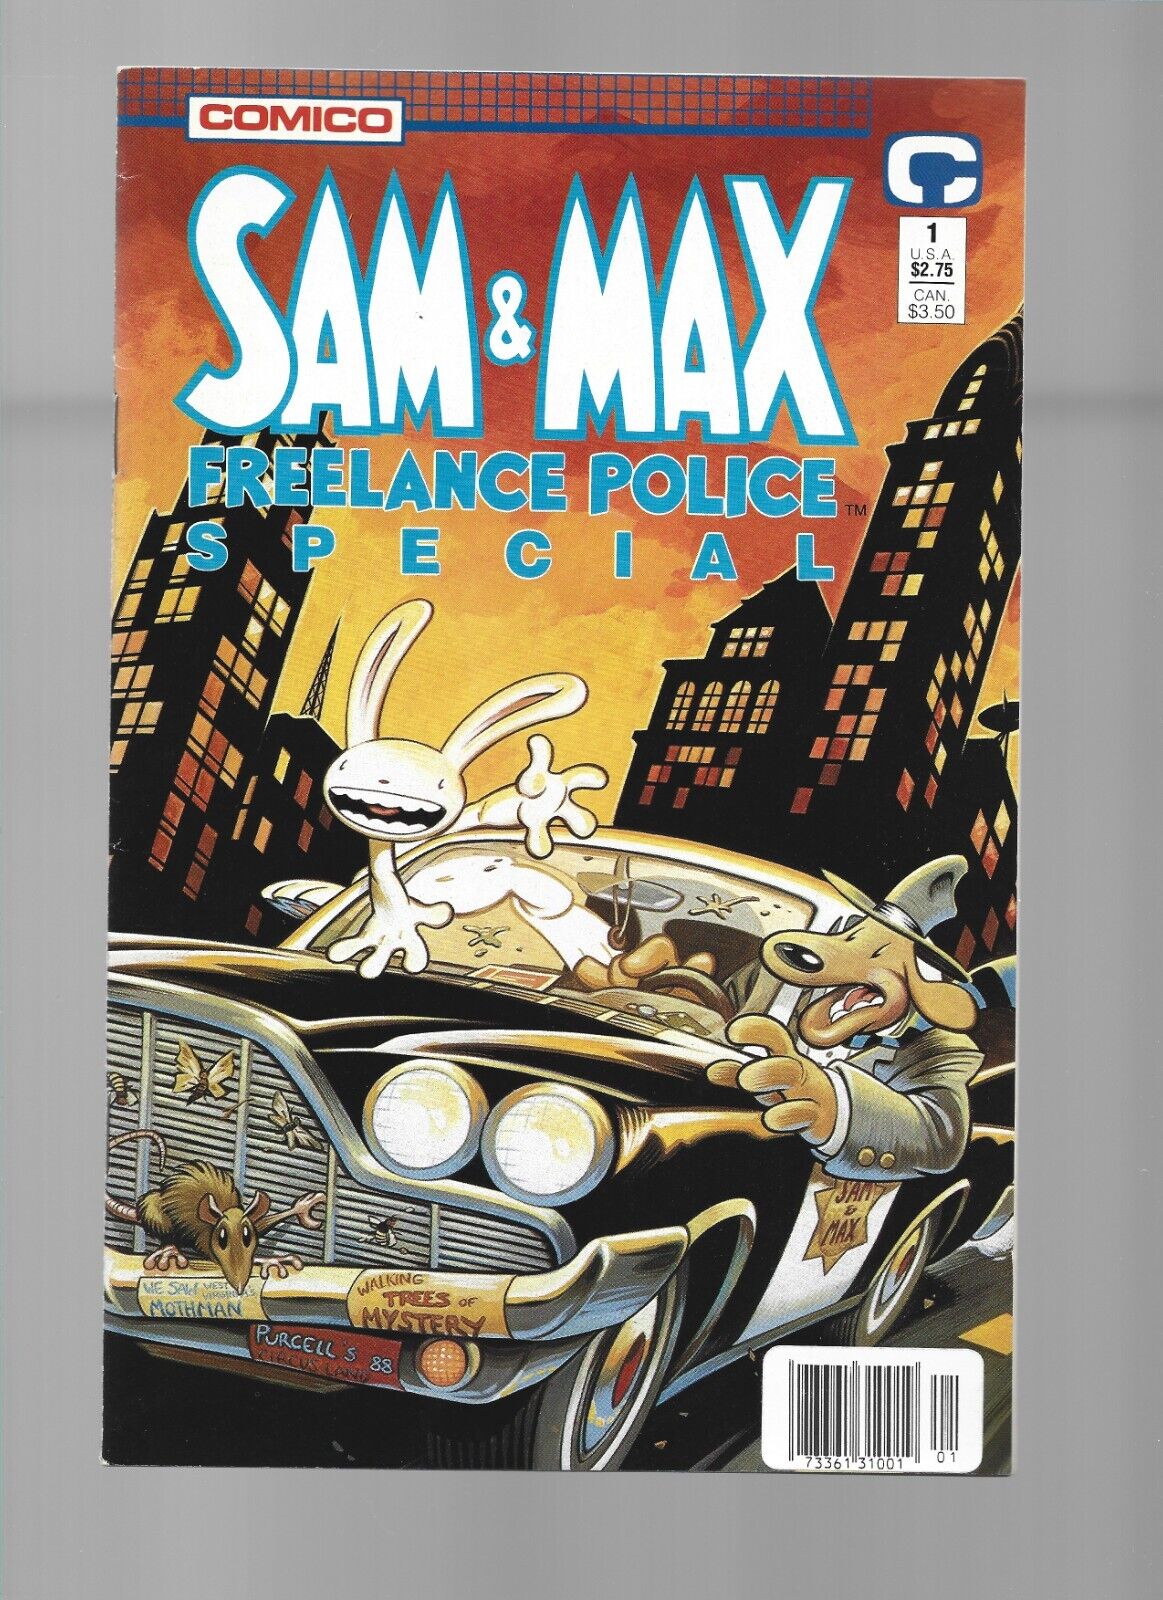 Sam & Max Freelance Police Special #1 Comico Comics UNLIMITED SHIPPING $4.99